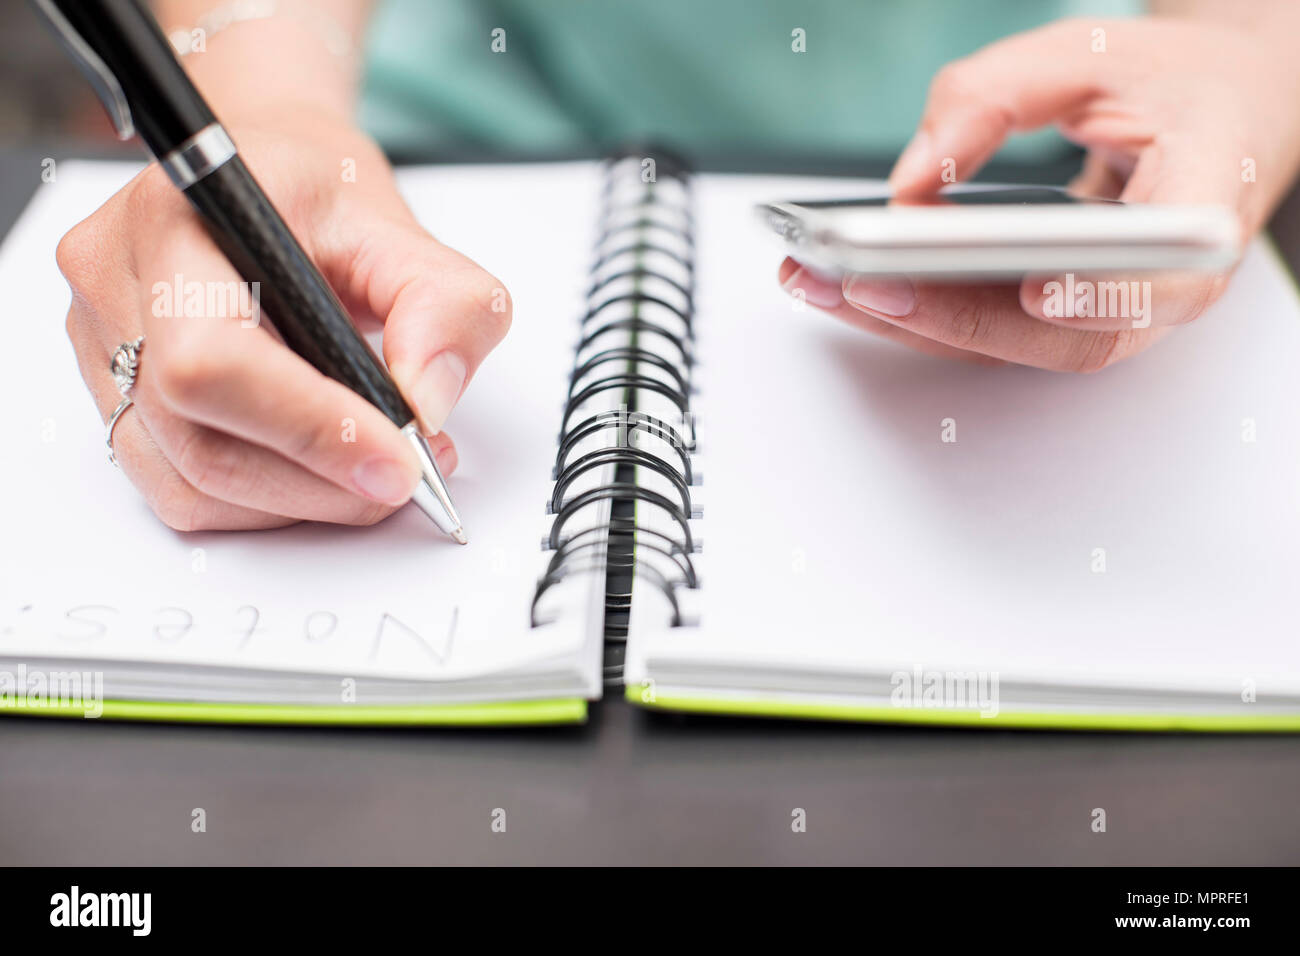 Woman writing notes in diary, holding smartphone Stock Photo